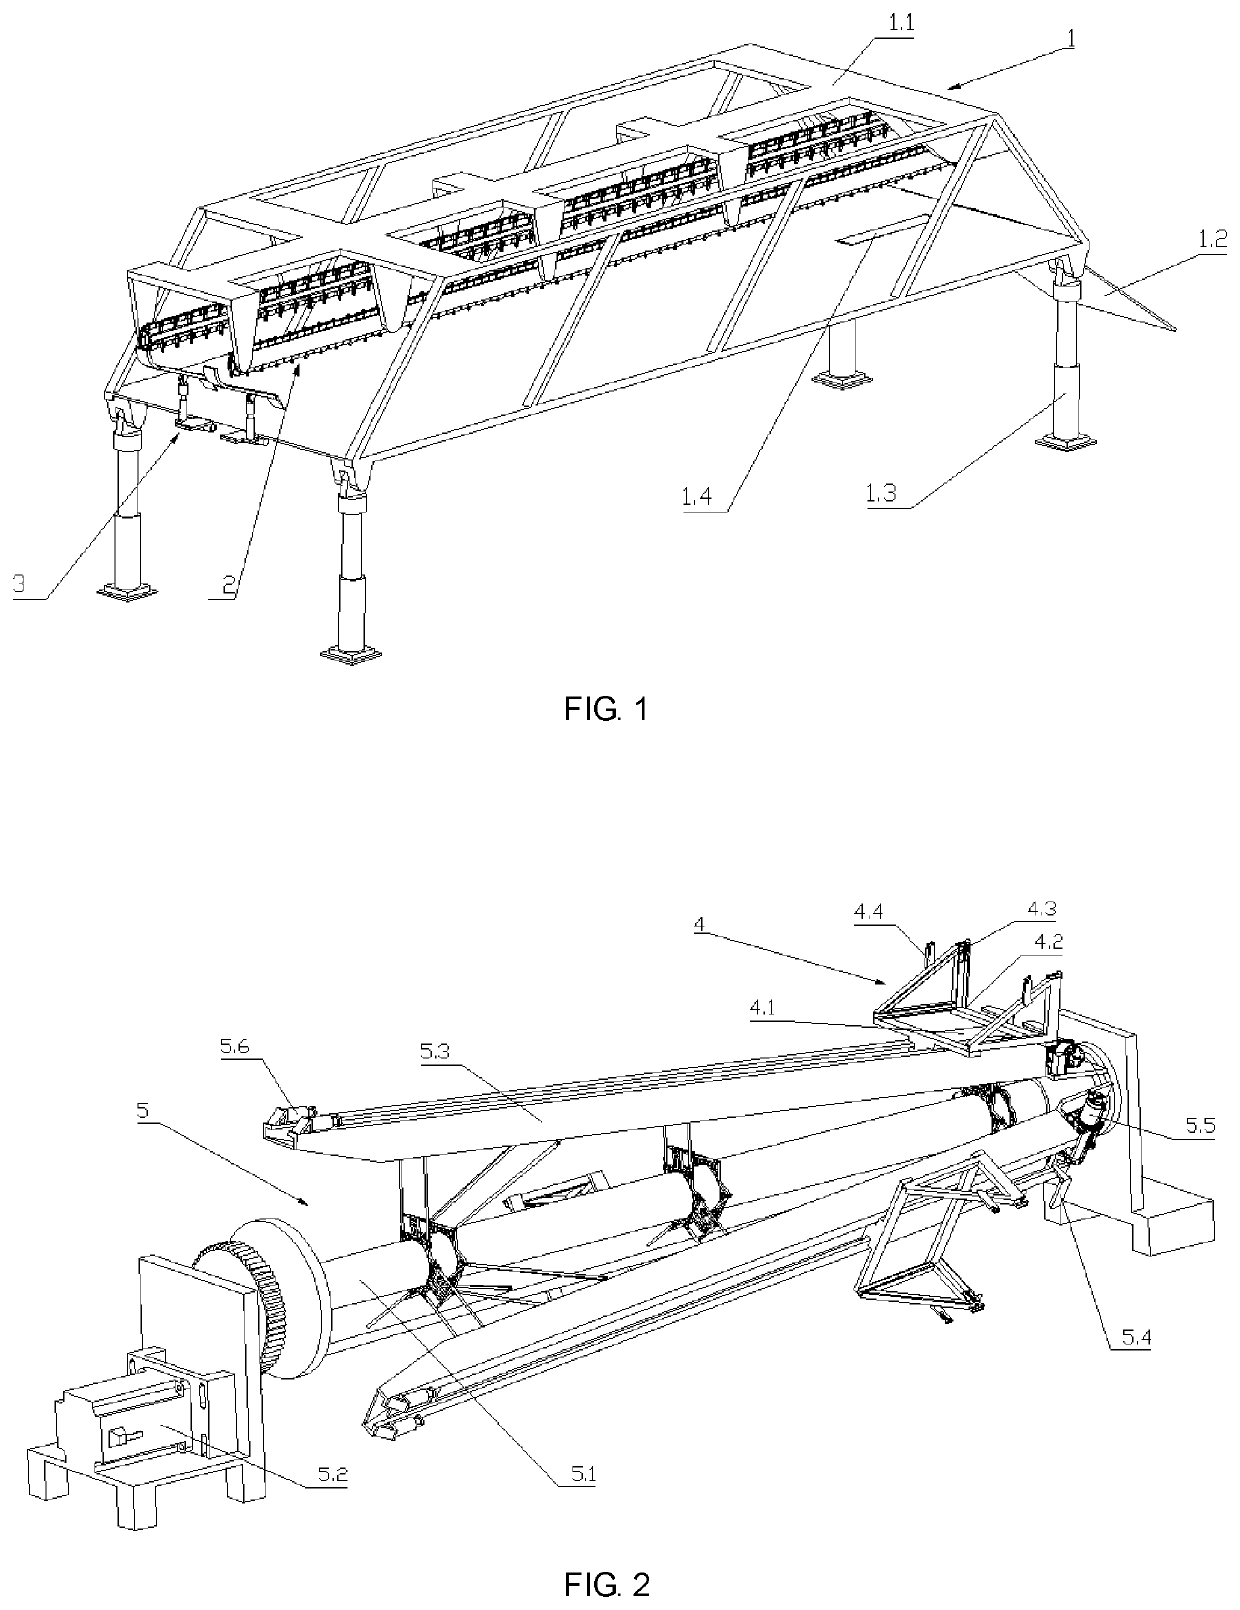 Apparatus and method for continuous launching of unmanned aerial vehicles